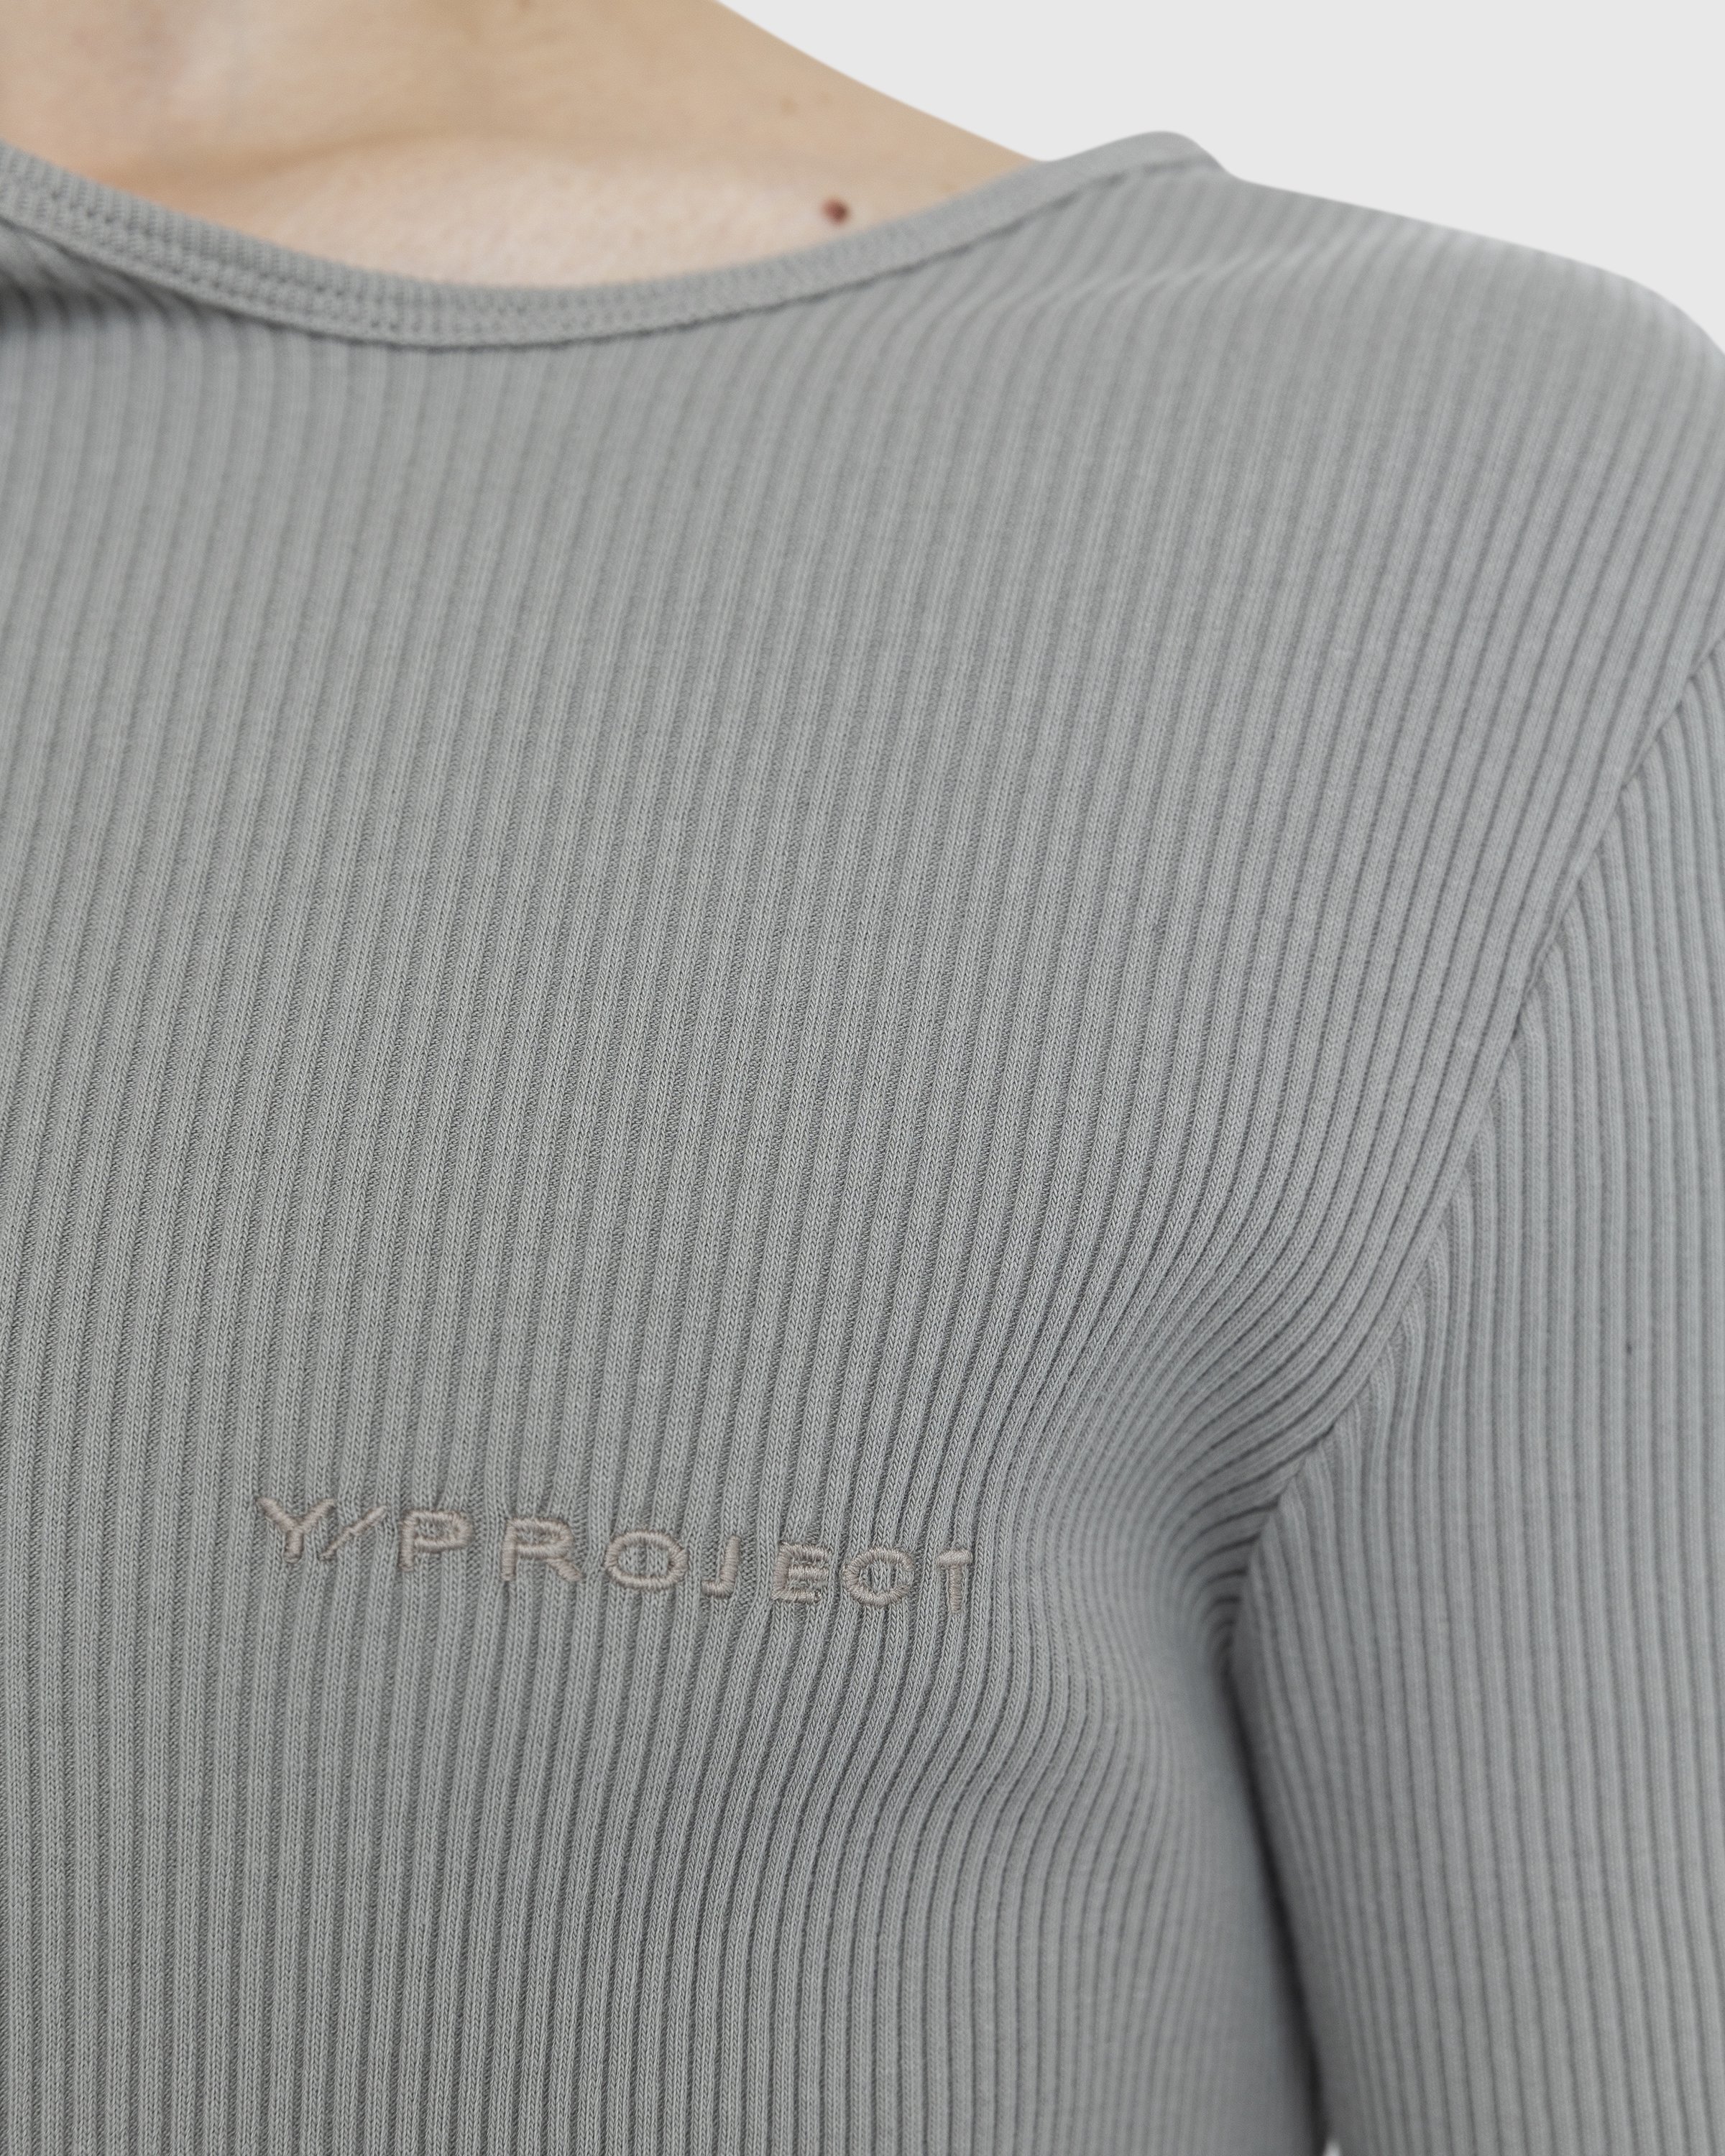 Y/Project - Classic Double Collar T-Shirt Taupe - Clothing - Grey - Image 7